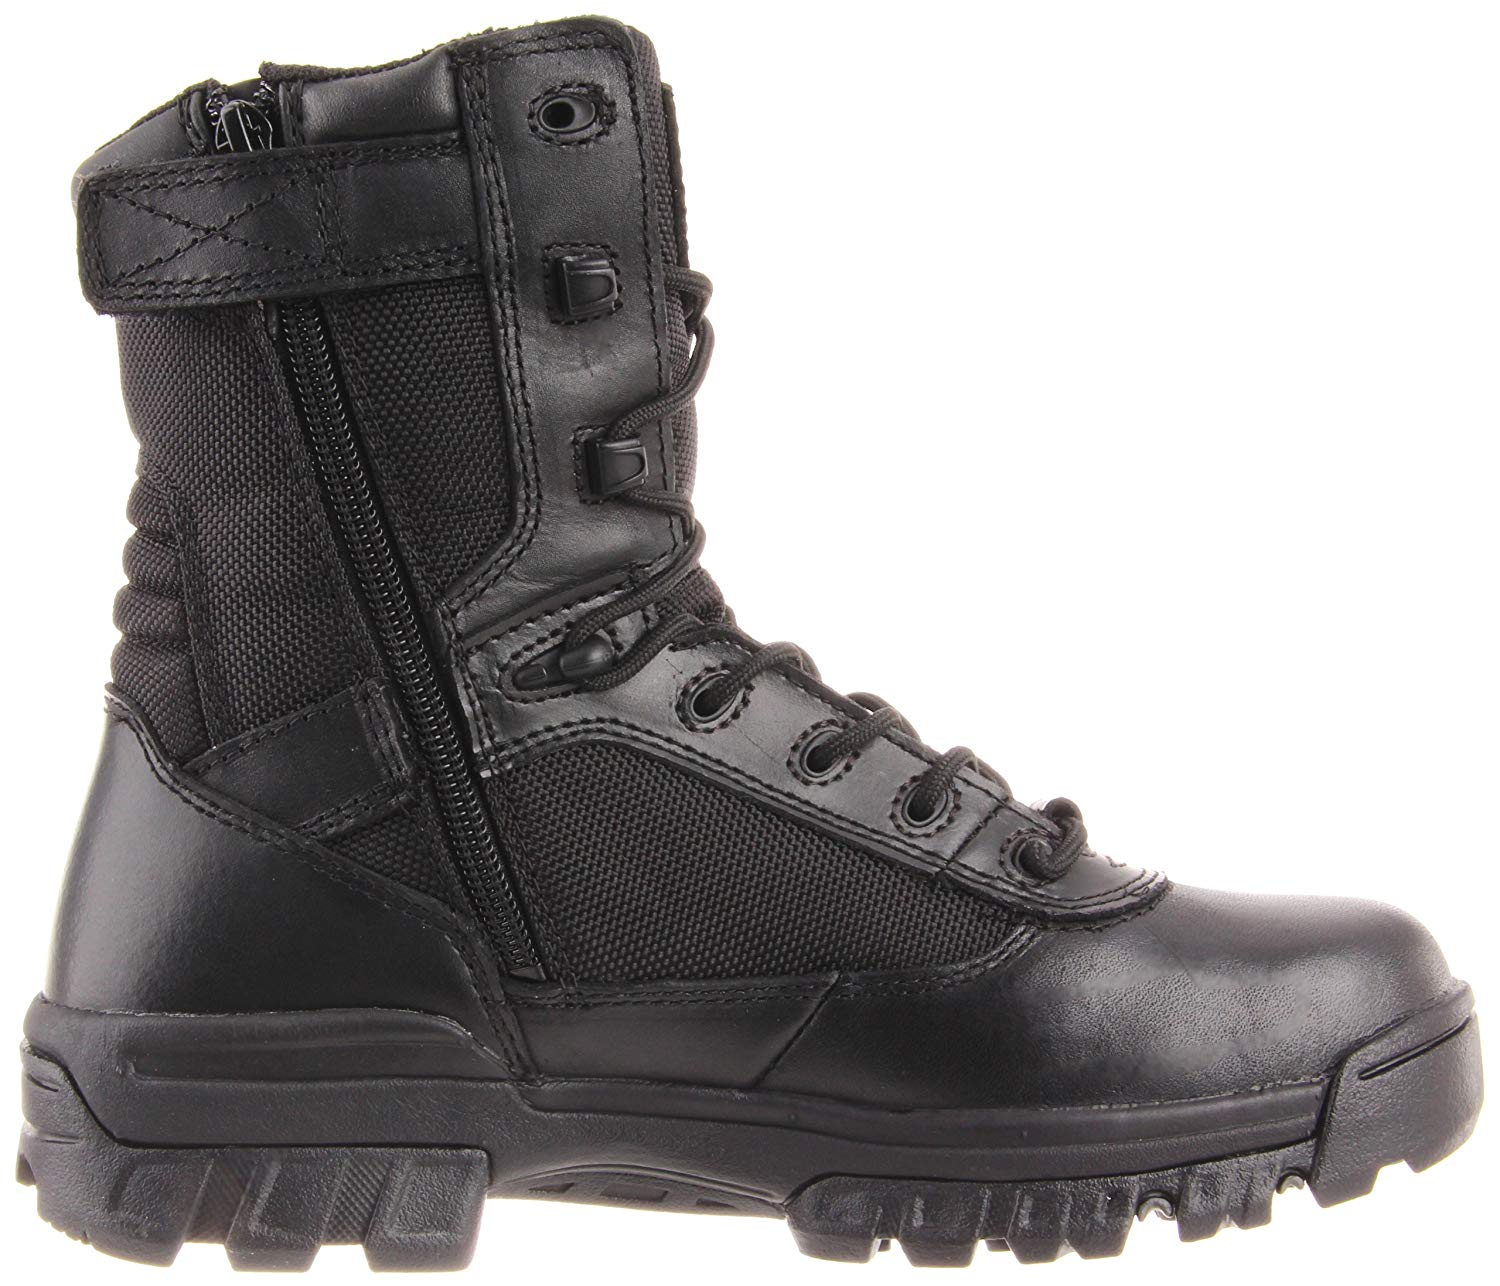 Bates Women's Ultra-Lites 8 Inches Tactical Sport Side-Zip Boot, Black ...